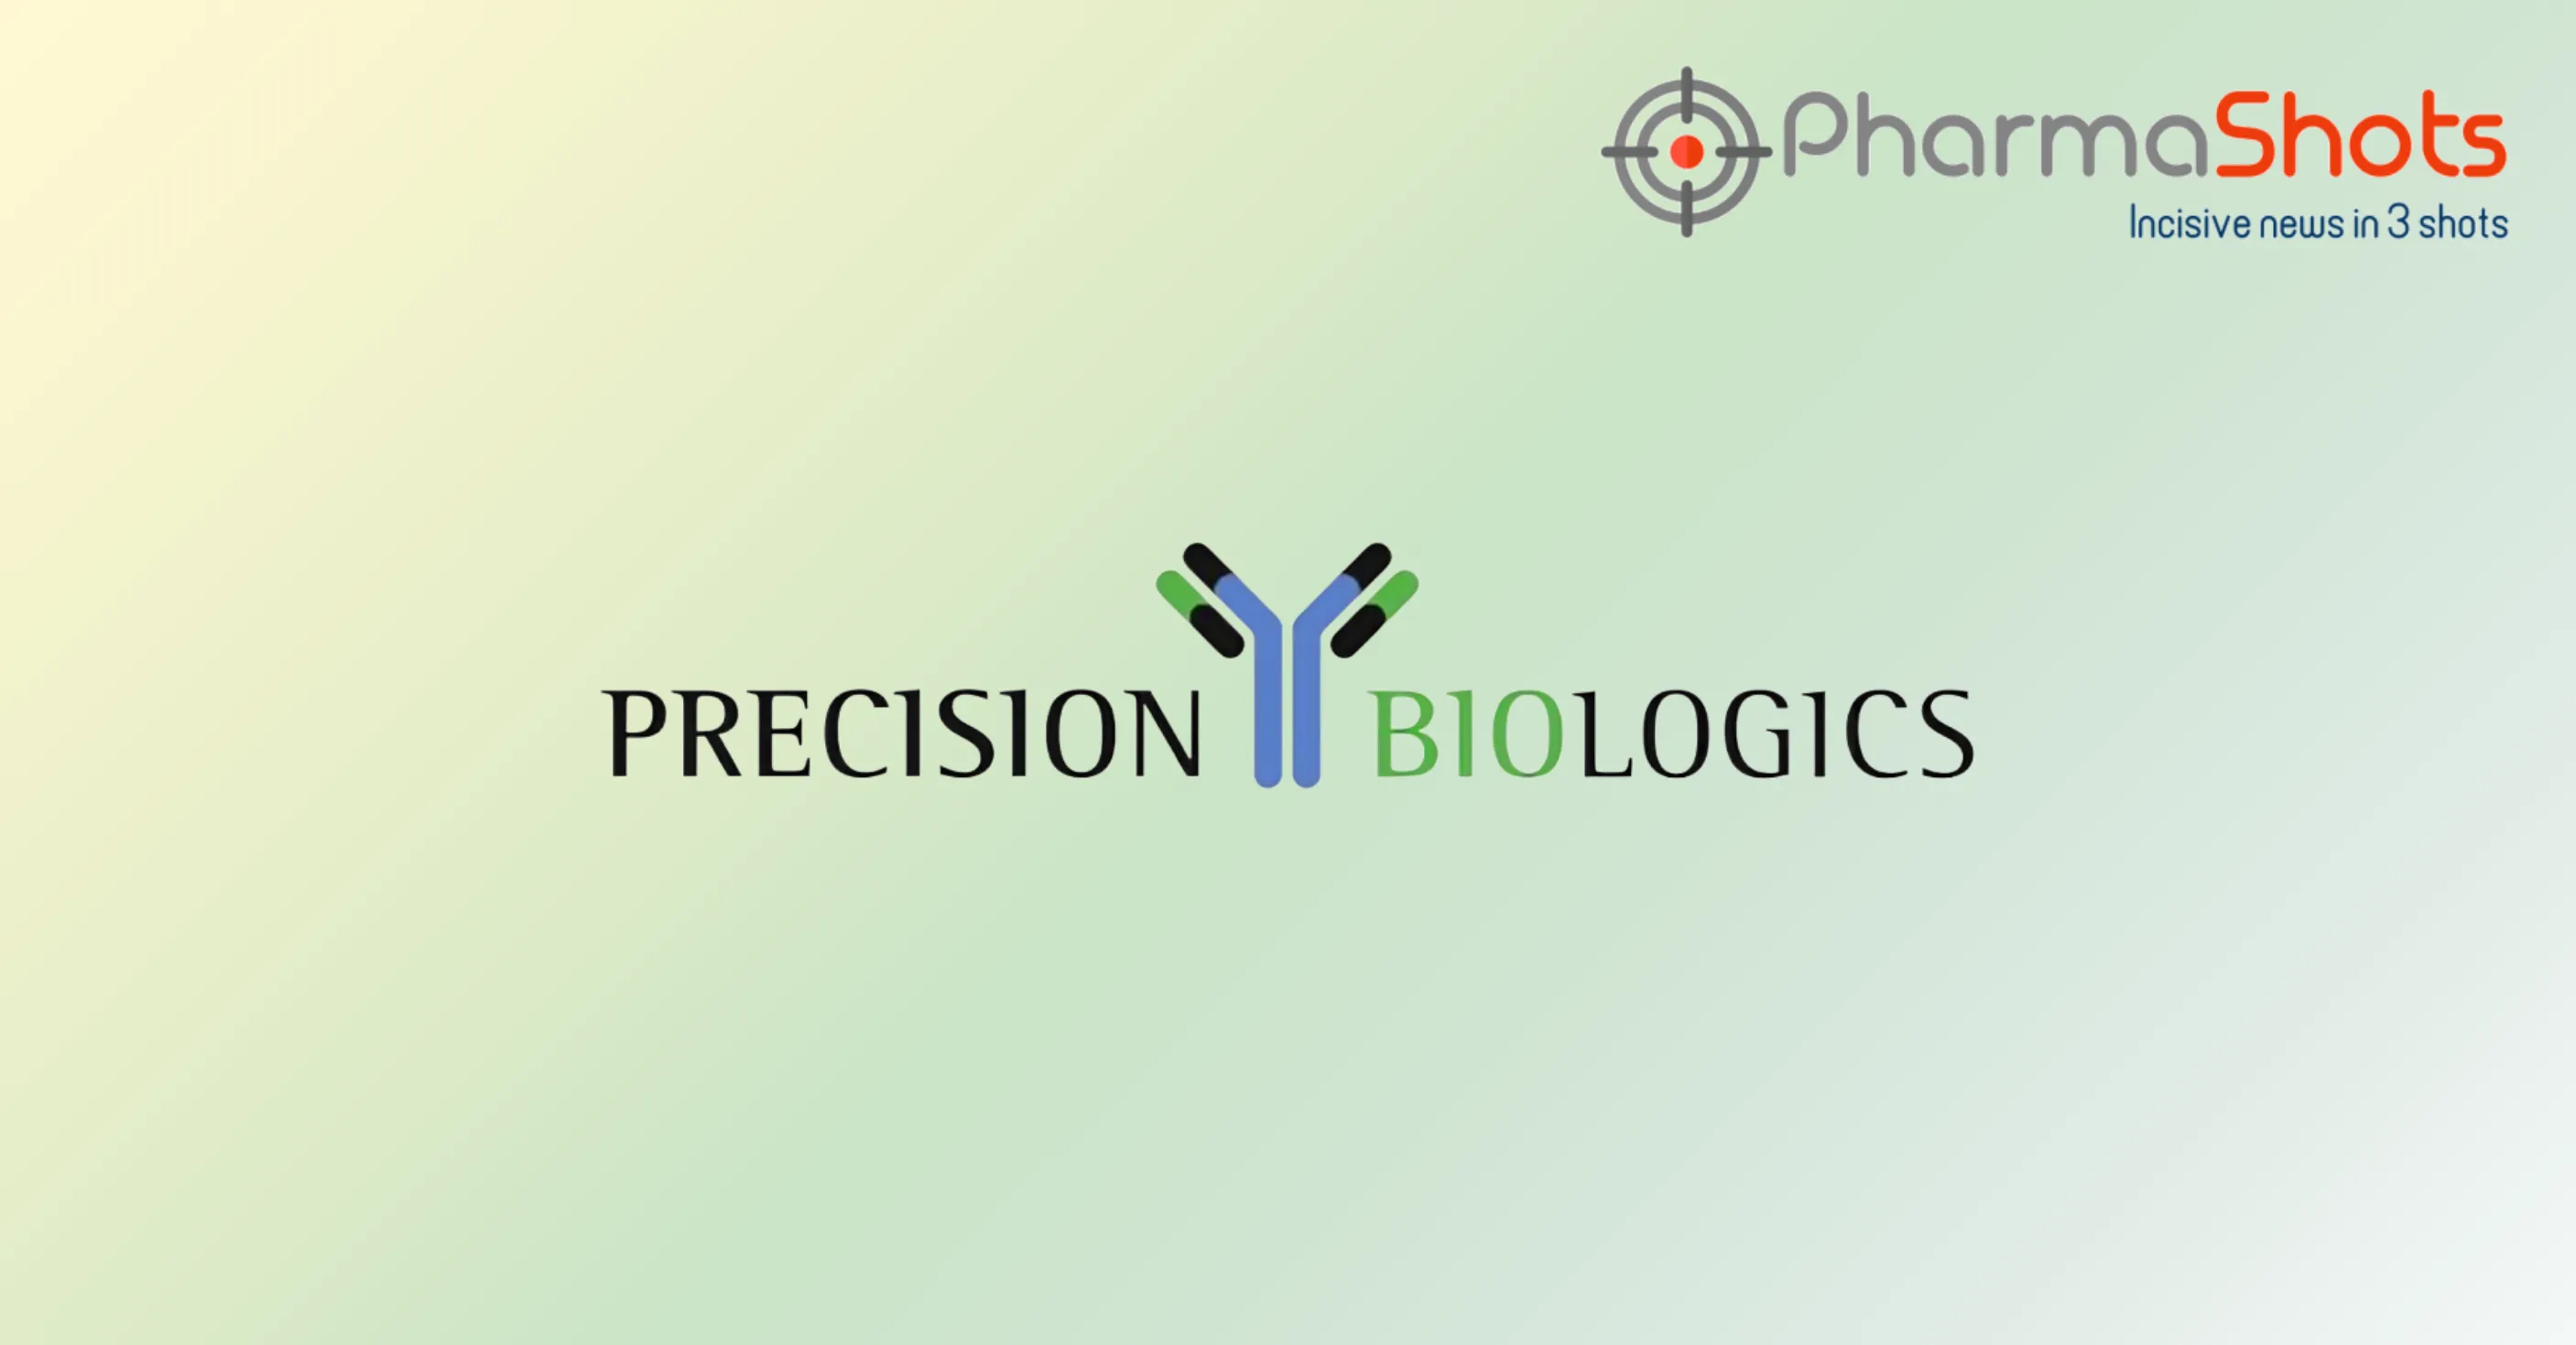 The USPTO Issues Patent Covering Precision Biologics’ NEO-201 for its Methods of Targeting Treg Cells